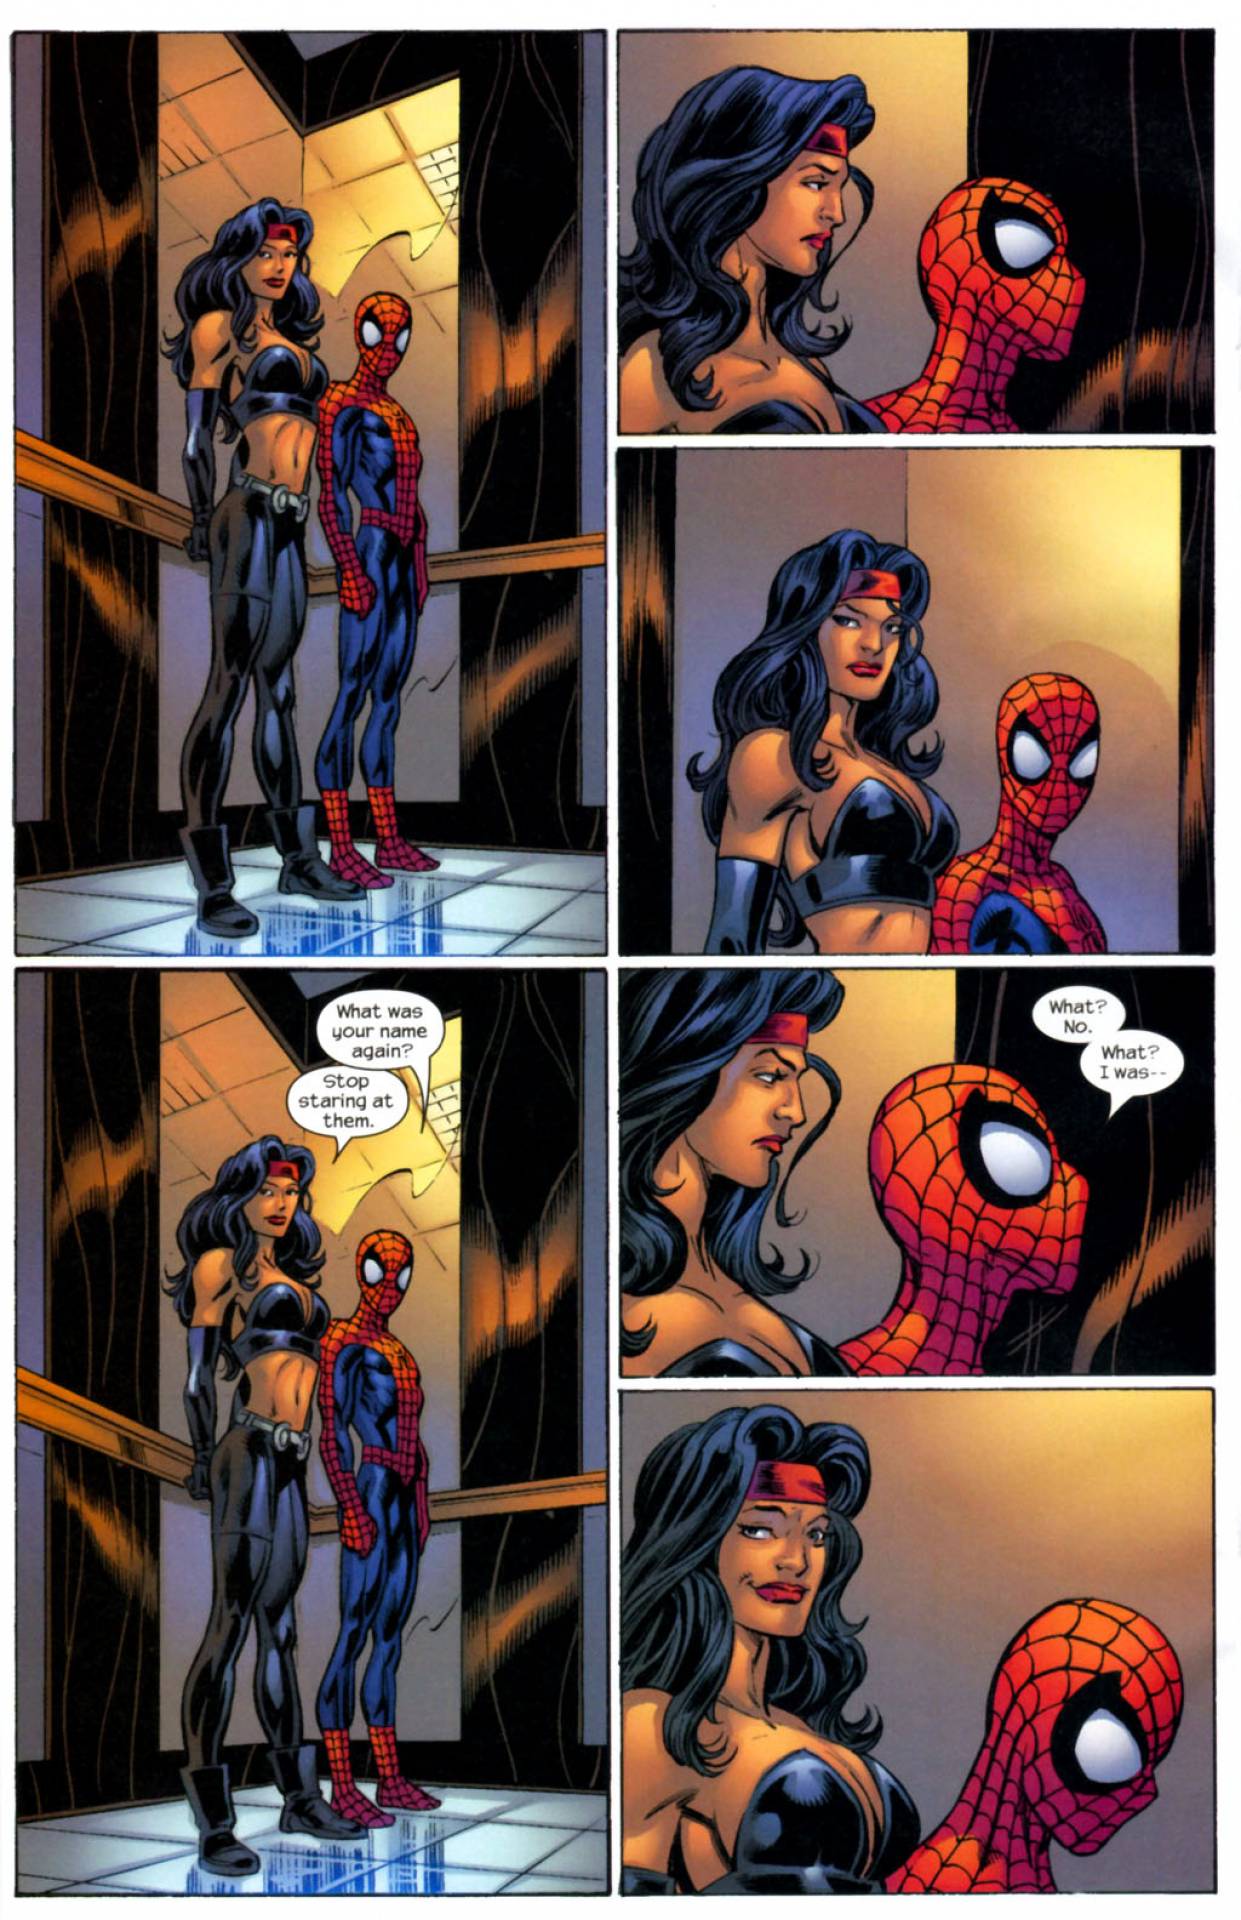 spider man and elektra - What was your name again? Stop staring at them. What? No. What? I was